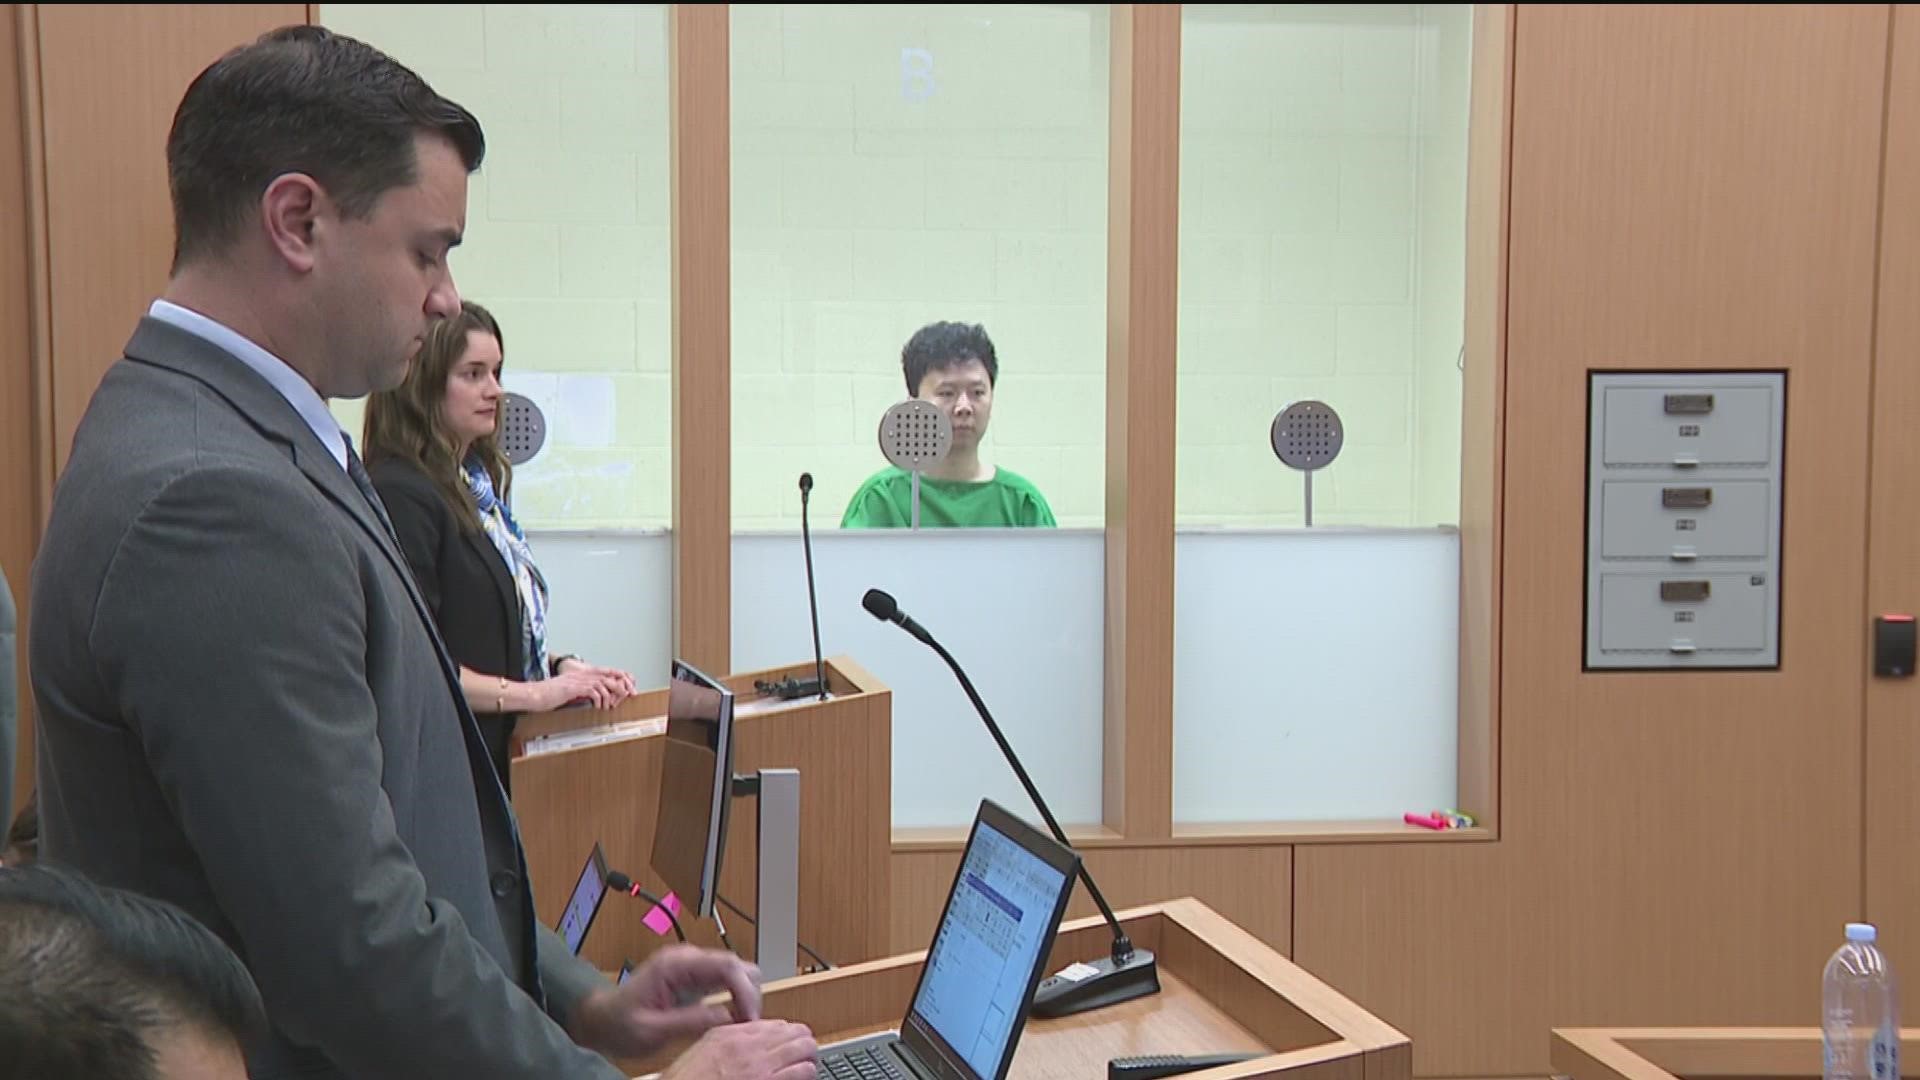 Yuhao Du entered pleas of not guilty and not guilty by reason of insanity